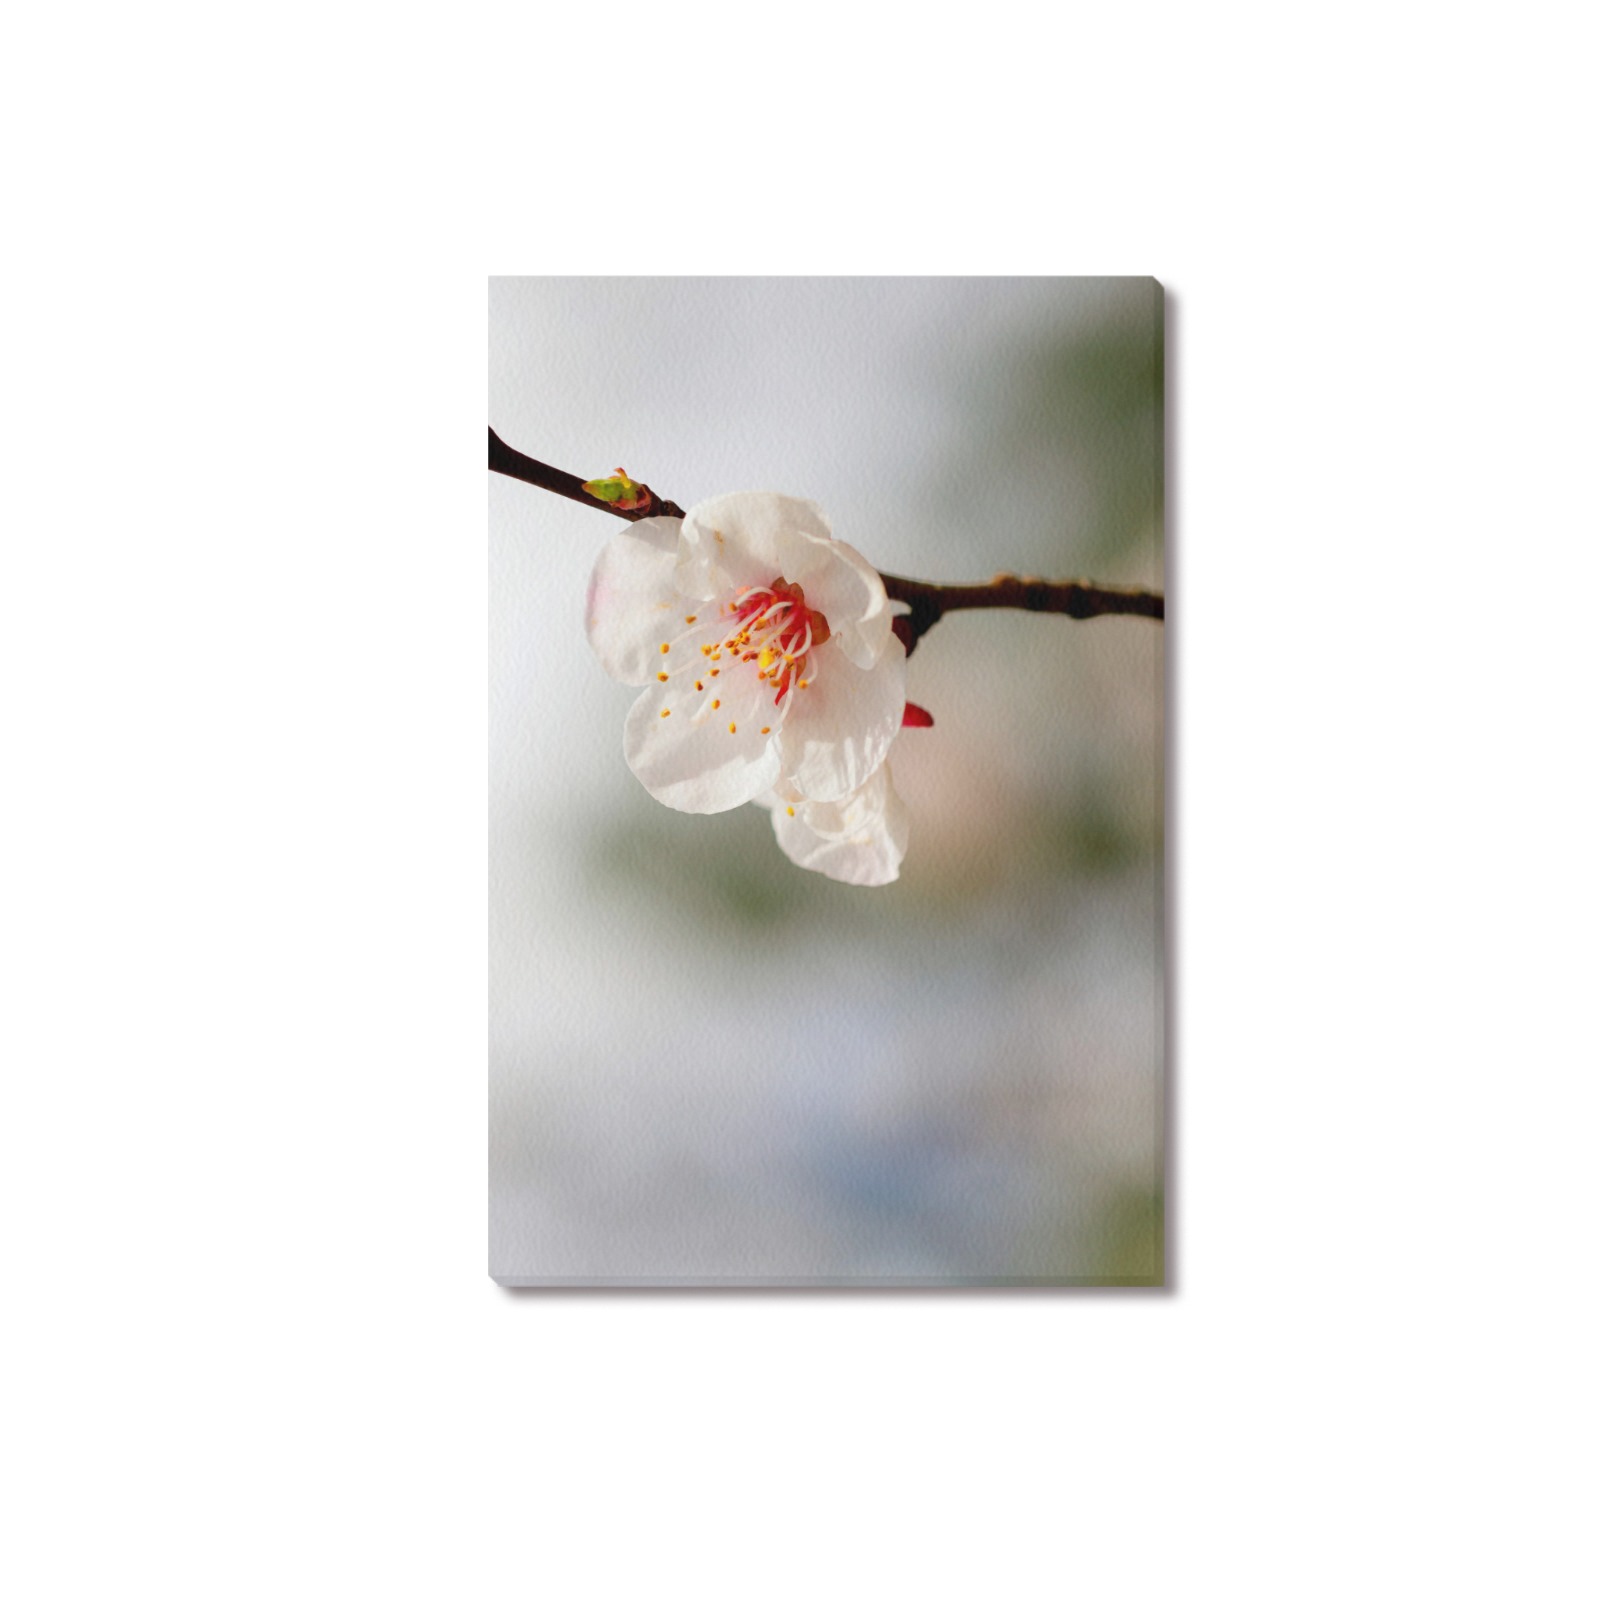 Proud white Japanese apricot flower in spring. Upgraded Canvas Print 18"x12"